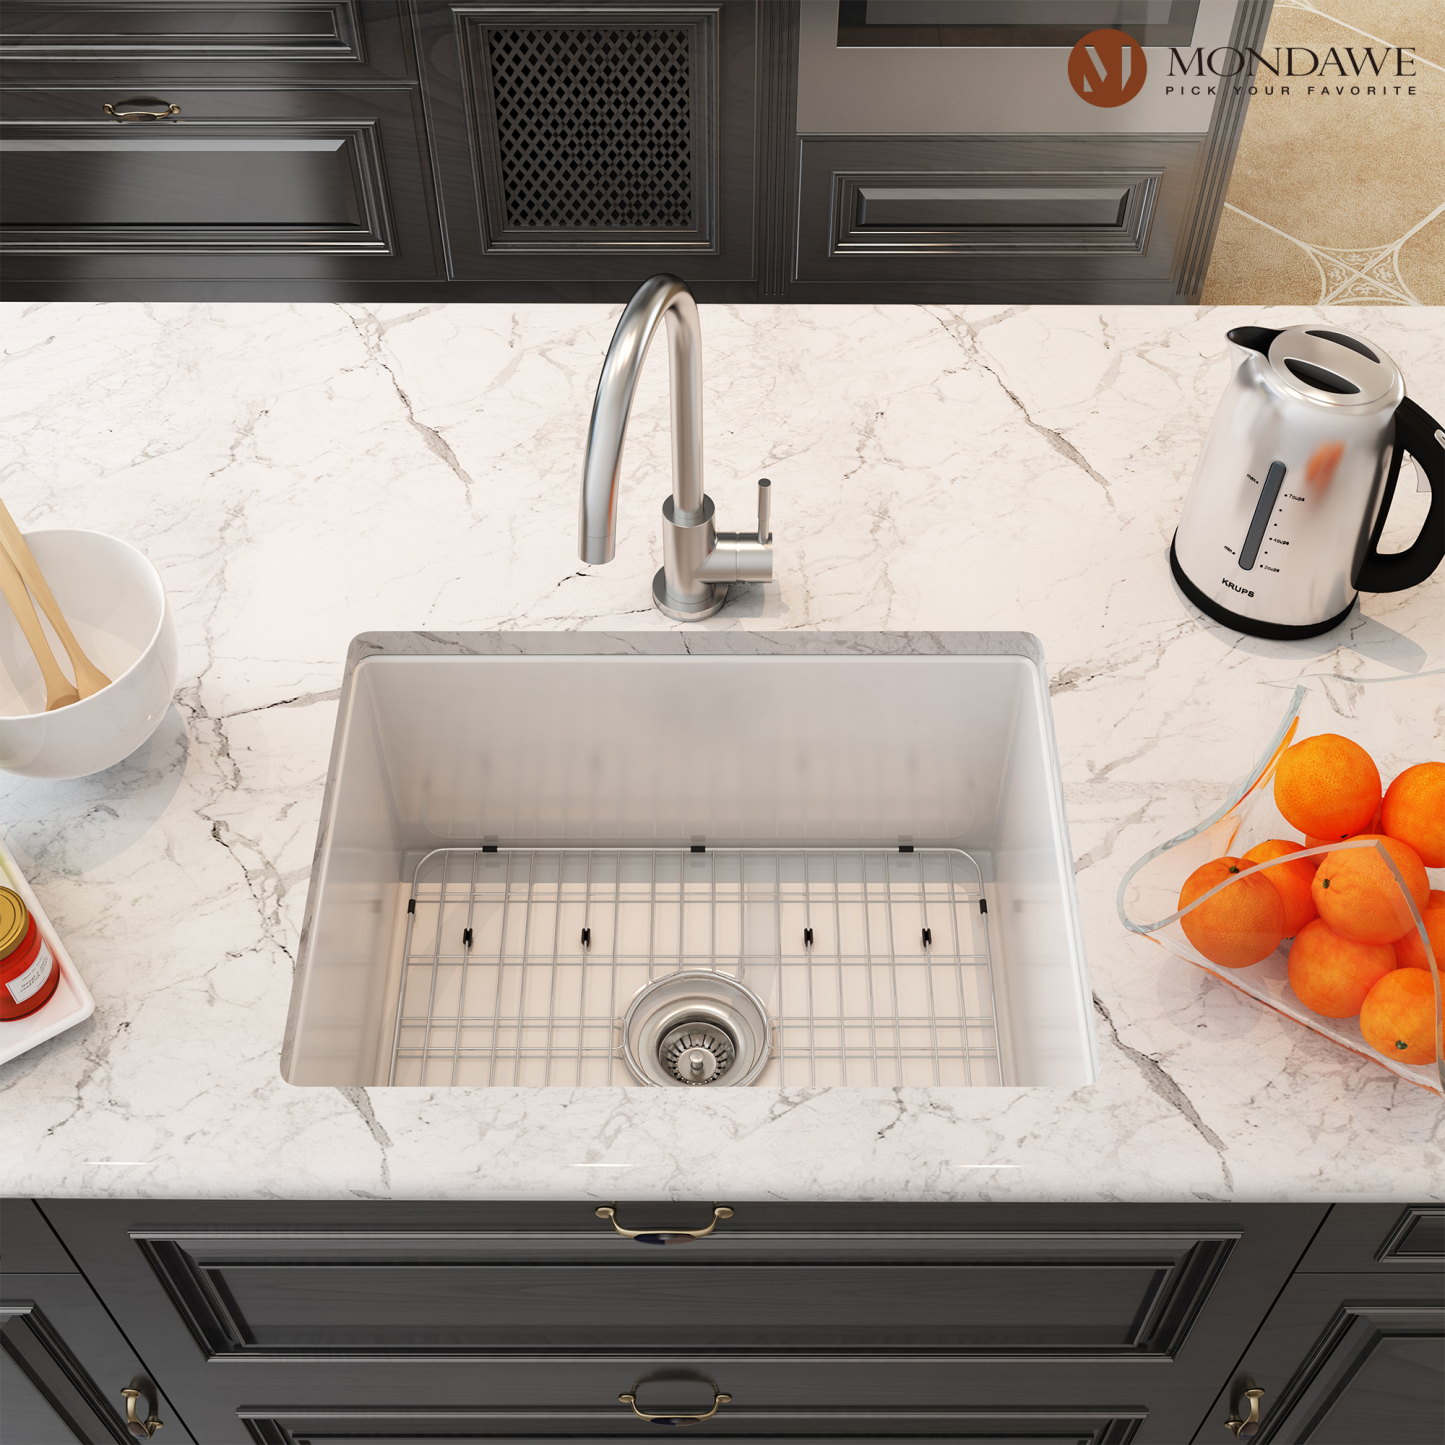 Undermount 24 in. single bowl fireclay kitchen sink in white comes with high-arc kitchen faucet-Mondawe